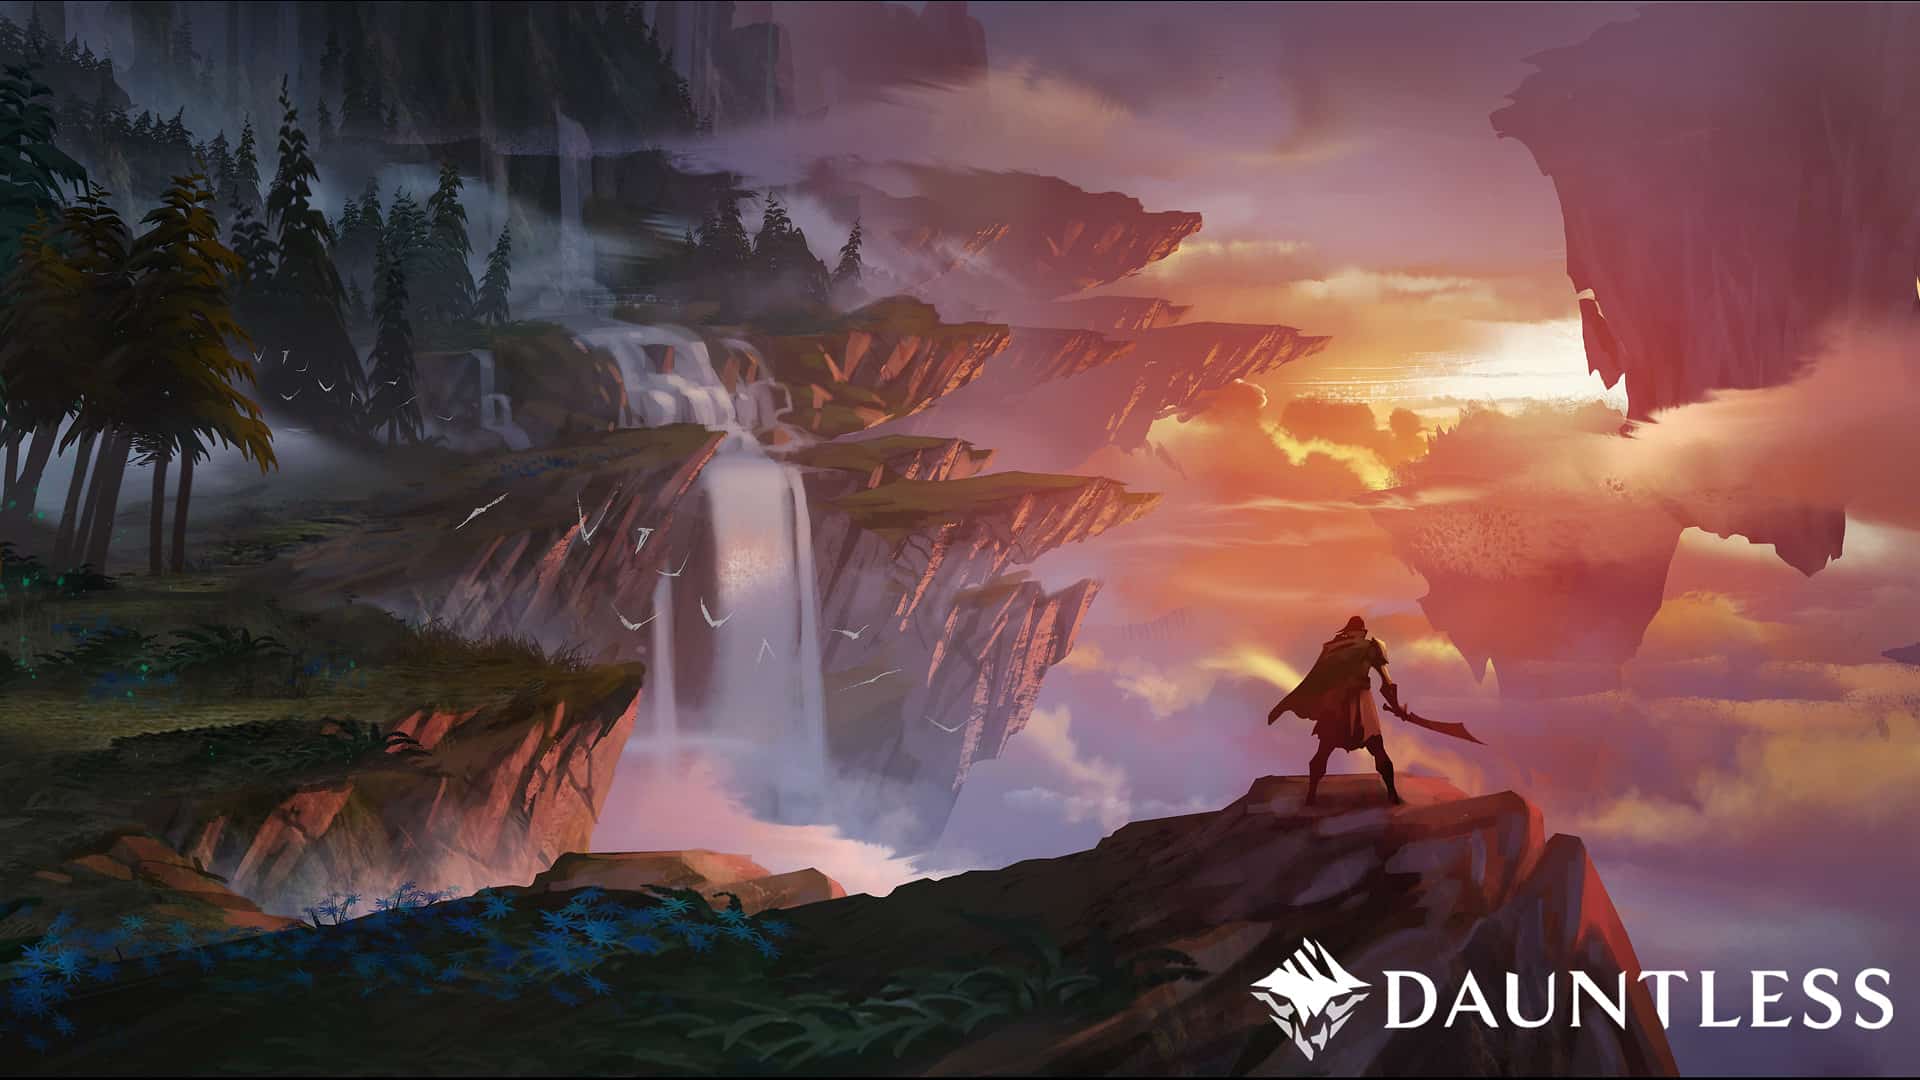 How much internet data does Dauntless use